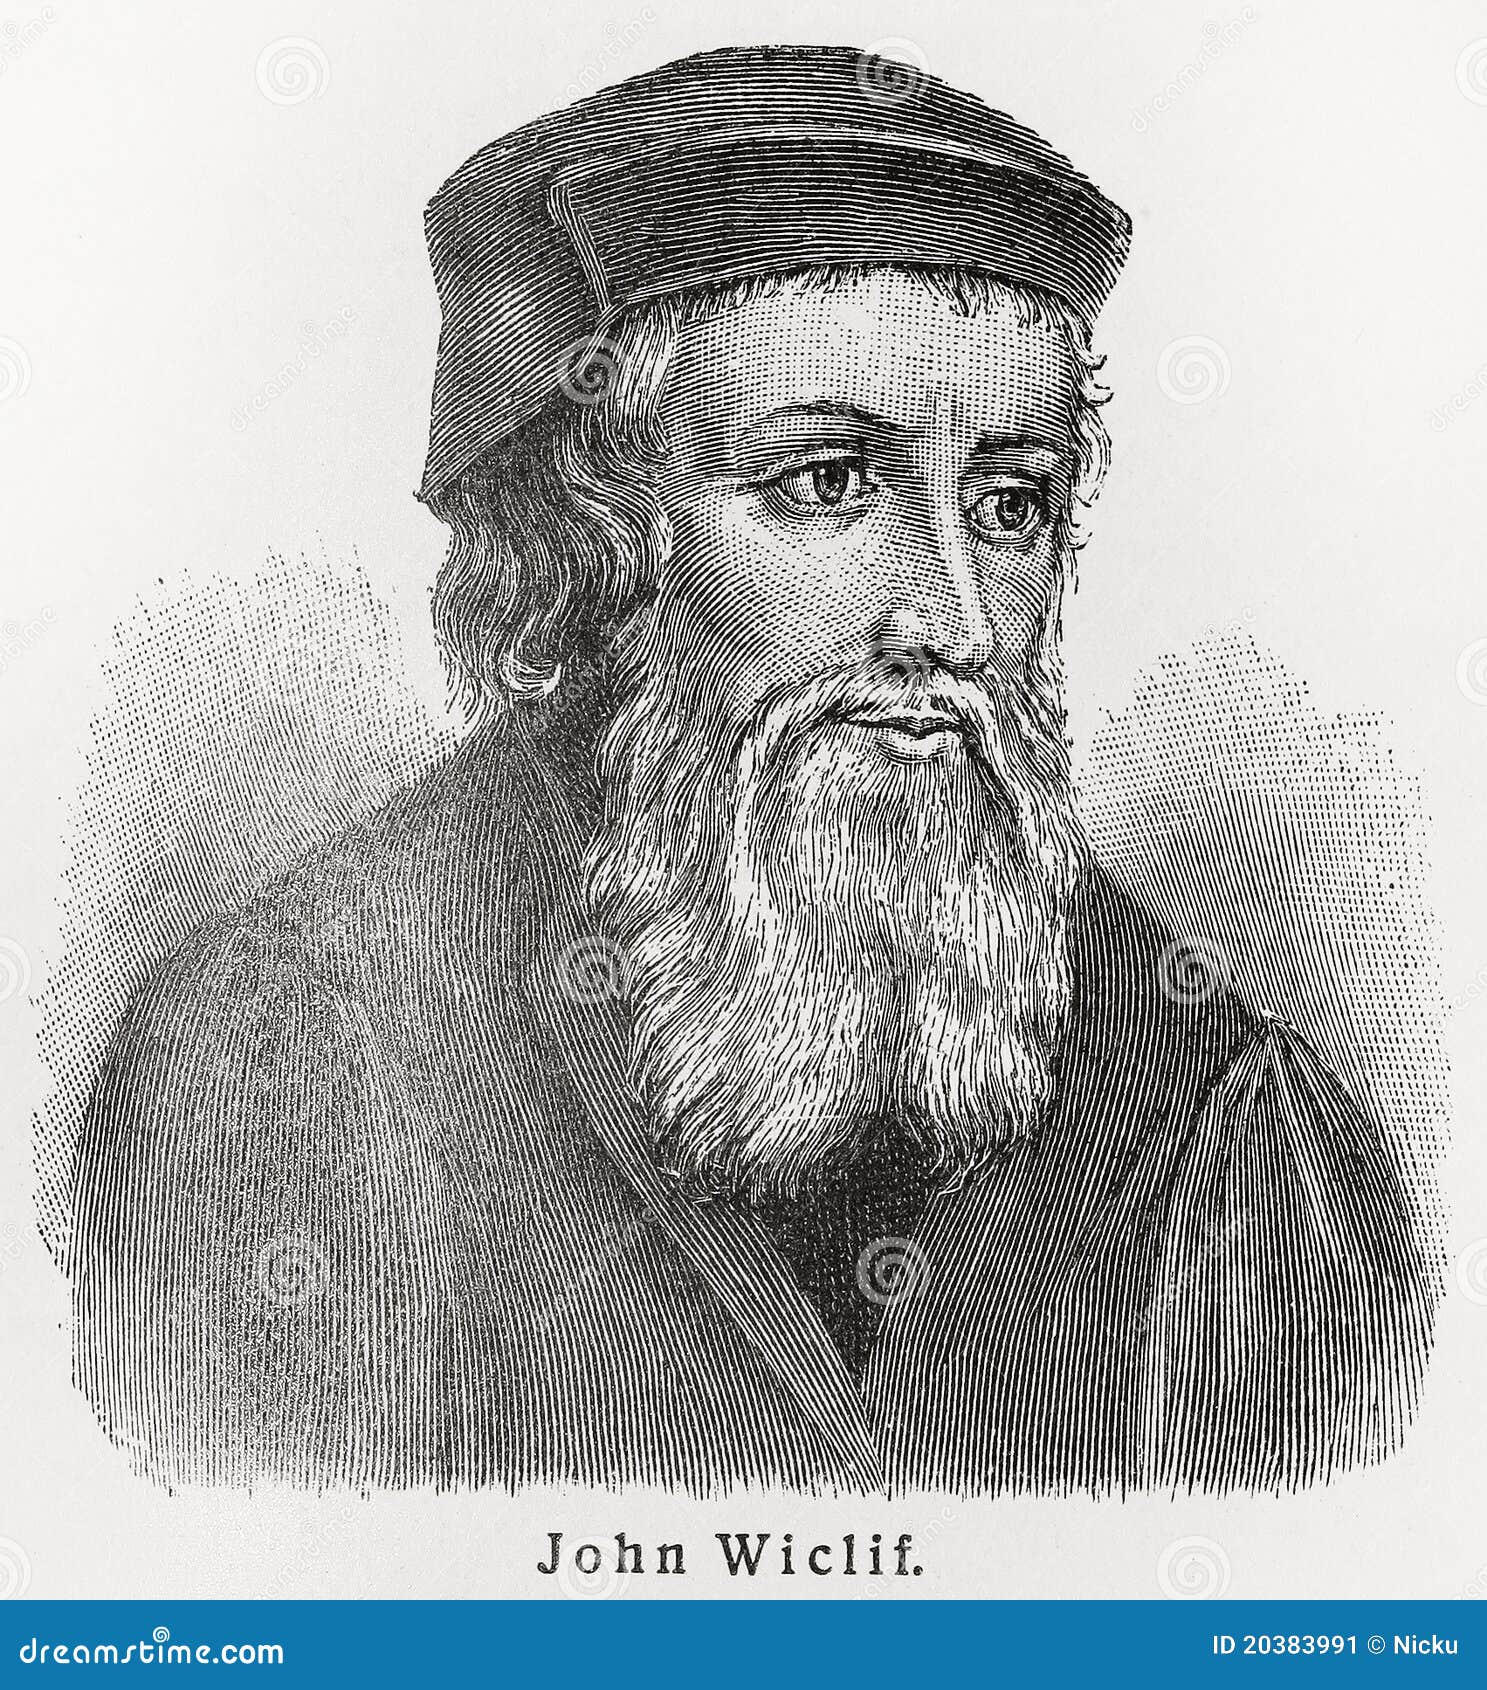 John Wycliffe (1328 - 1384) was an English Scholastic philosopher, theologian, lay preacher, translator, reformer and university teacher who was known as an ... - john-wycliffe-20383991